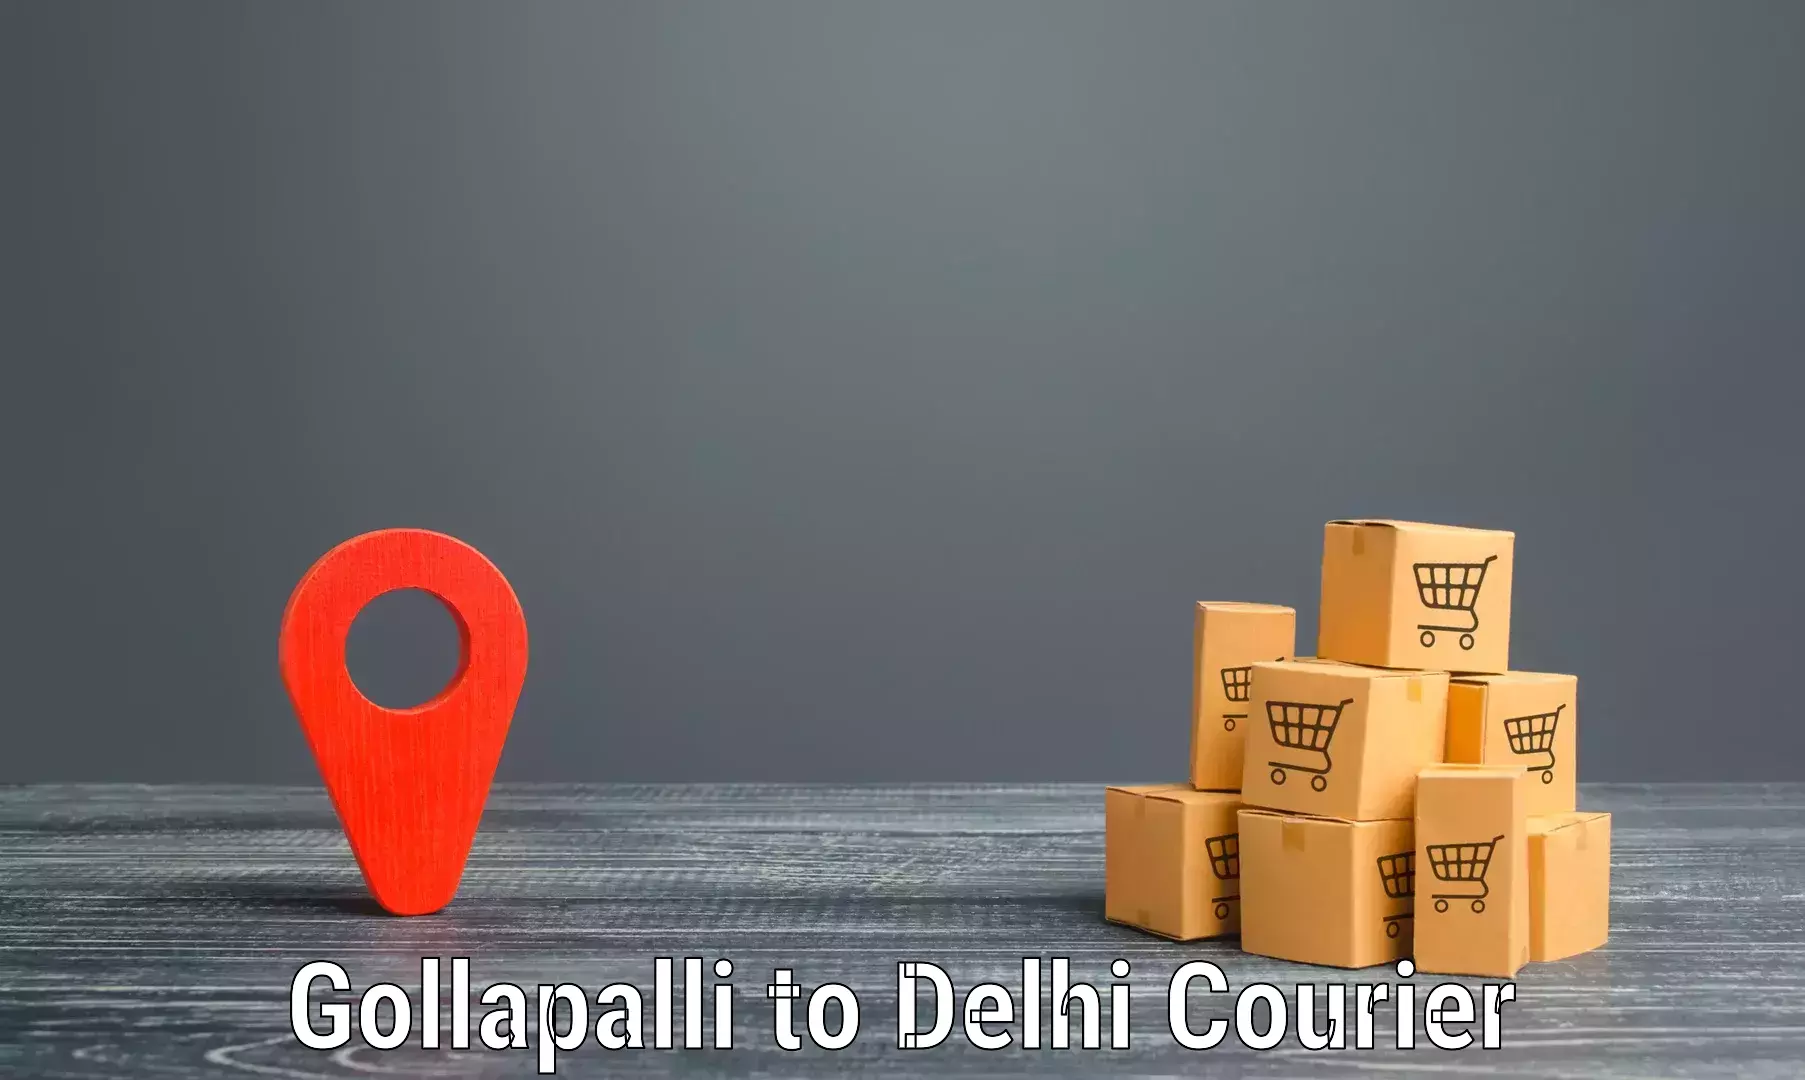 End-to-end delivery Gollapalli to Jamia Hamdard New Delhi